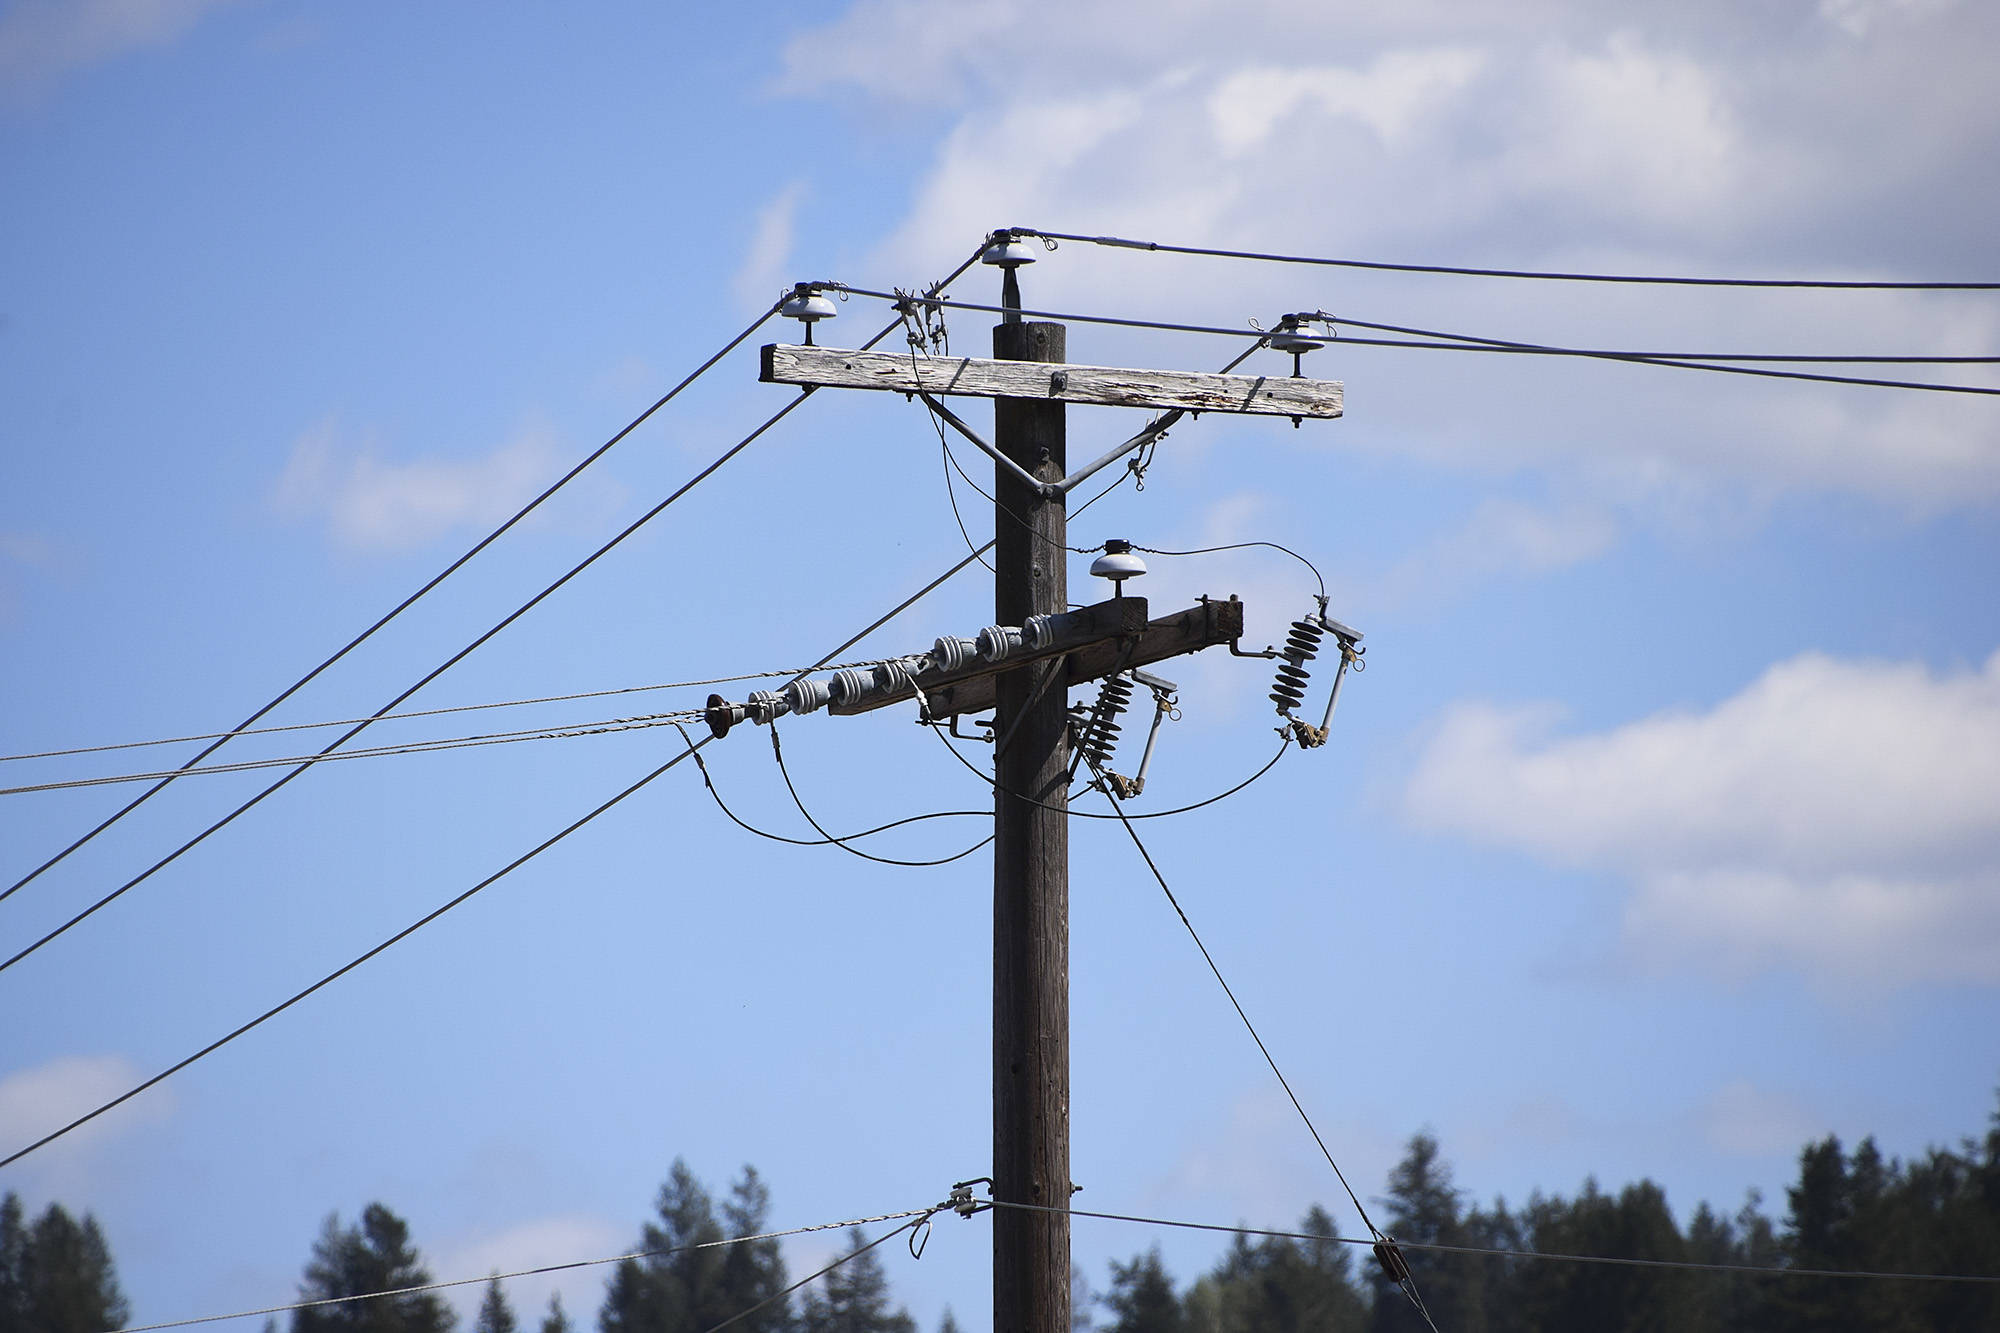 Power outage in Salmon Arm not caused by usual difficulties